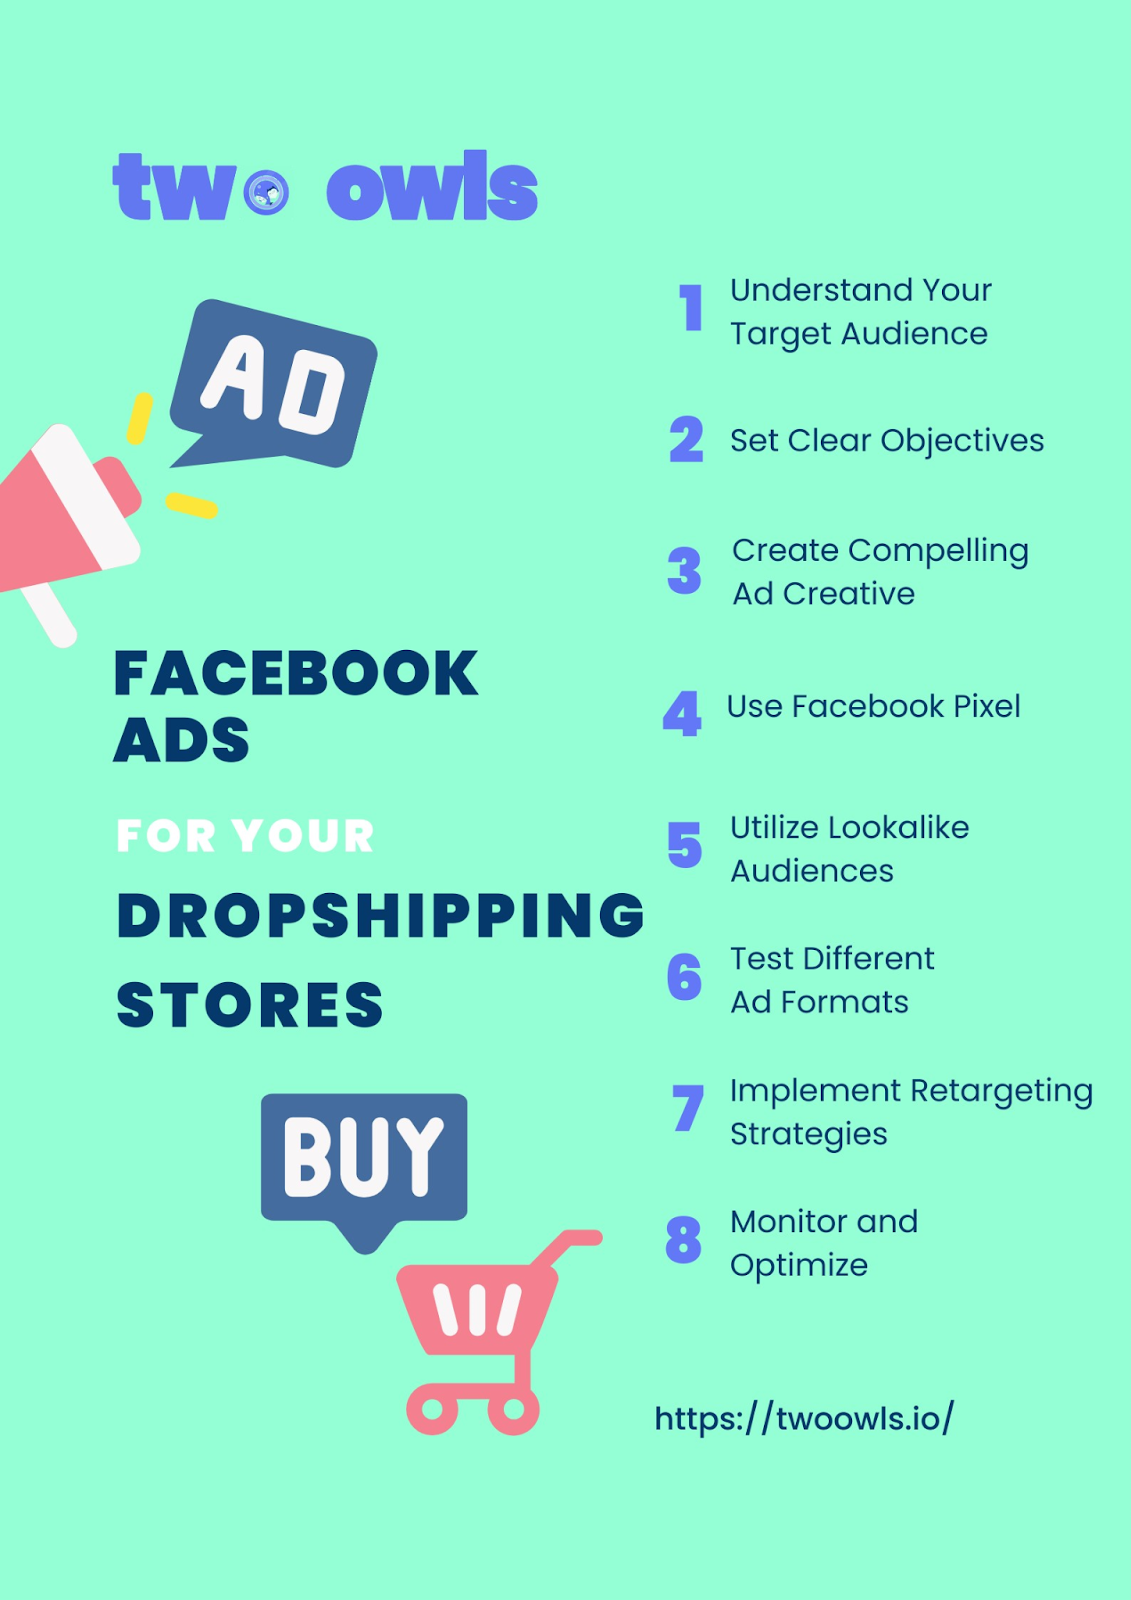 Facebook Ads for your dropshipping store